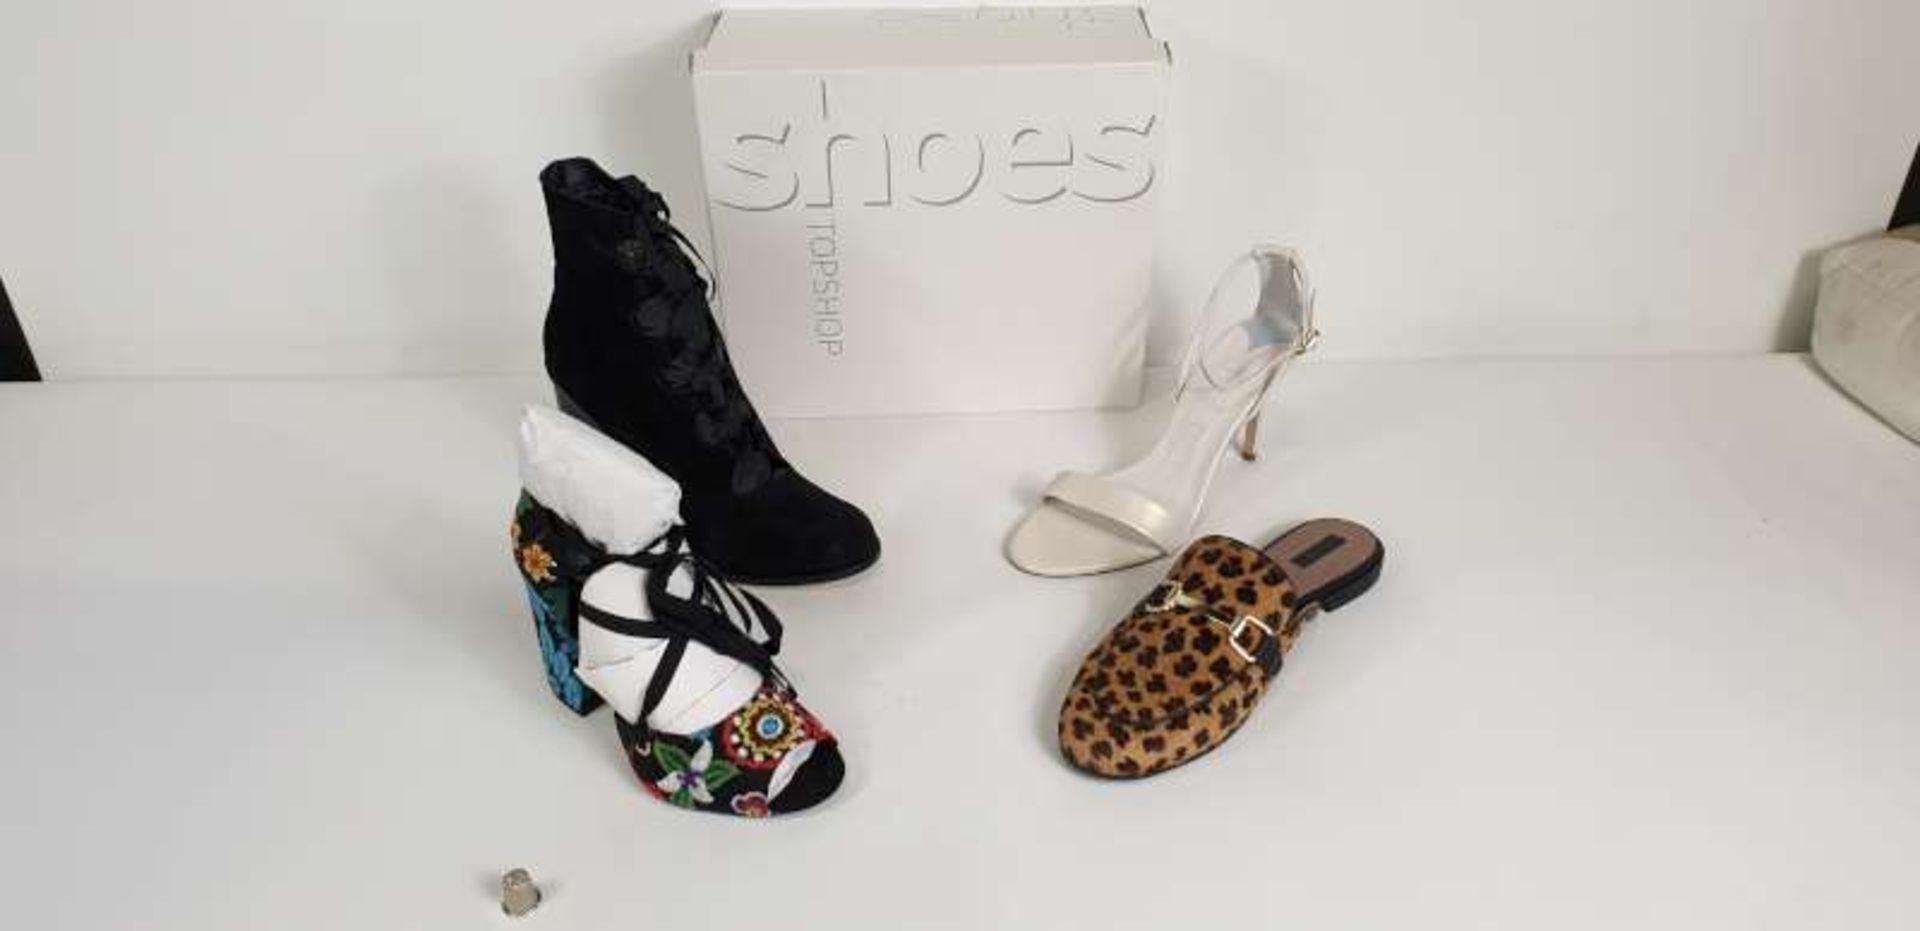 10 X BRAND NEW BOXED LADIES TOP SHOP SHOES IN VARIOUS STYLES AND SIZES TOTAL RRP £400 - £500